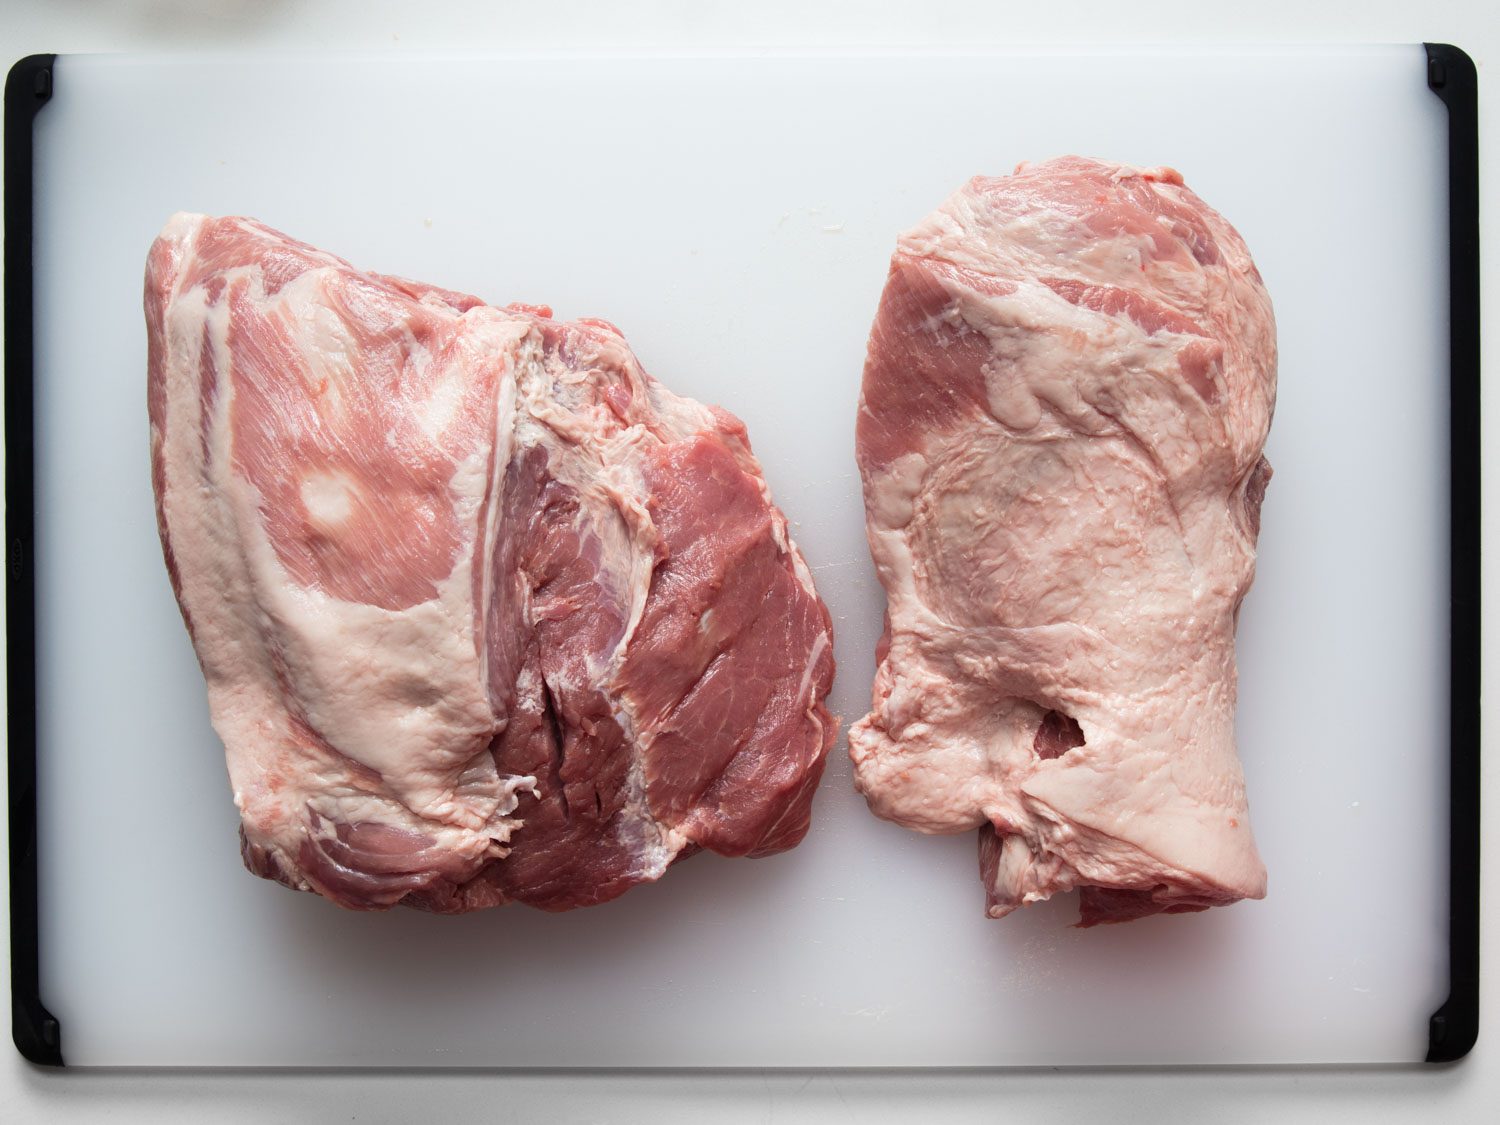 Overhead view of boneless skinless pork shoulder separated into two